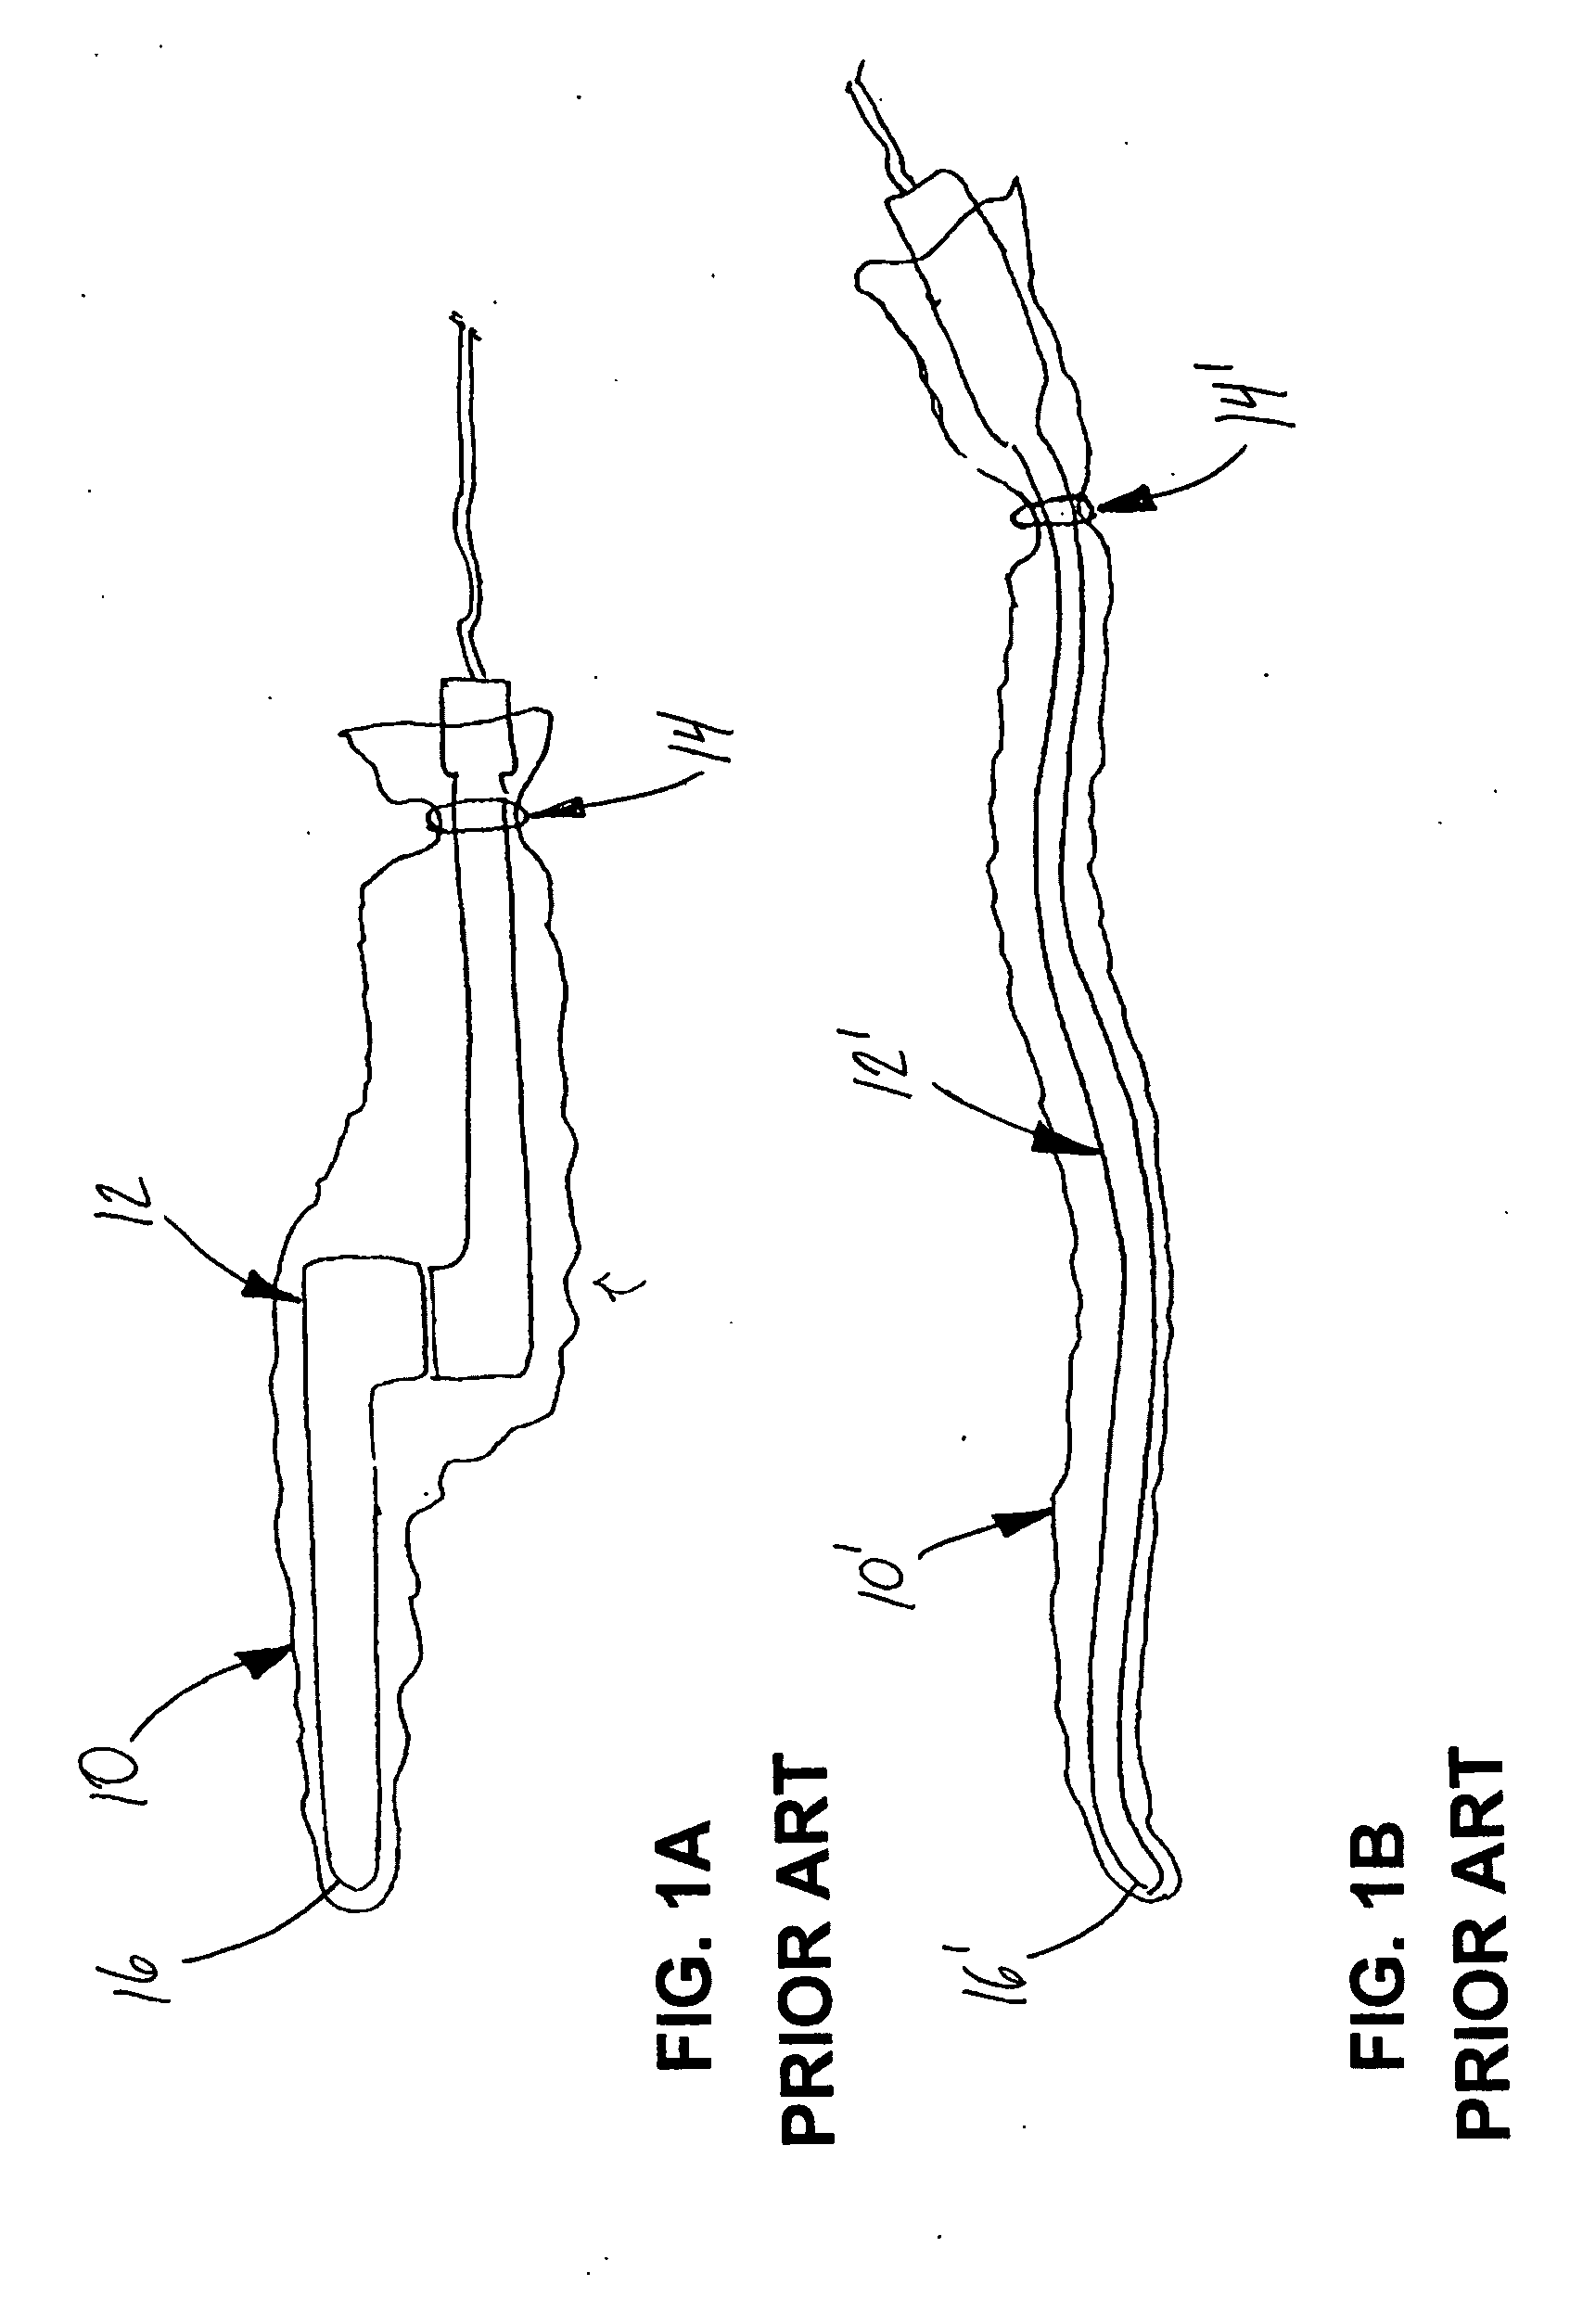 Method and device for covering a medical instrument